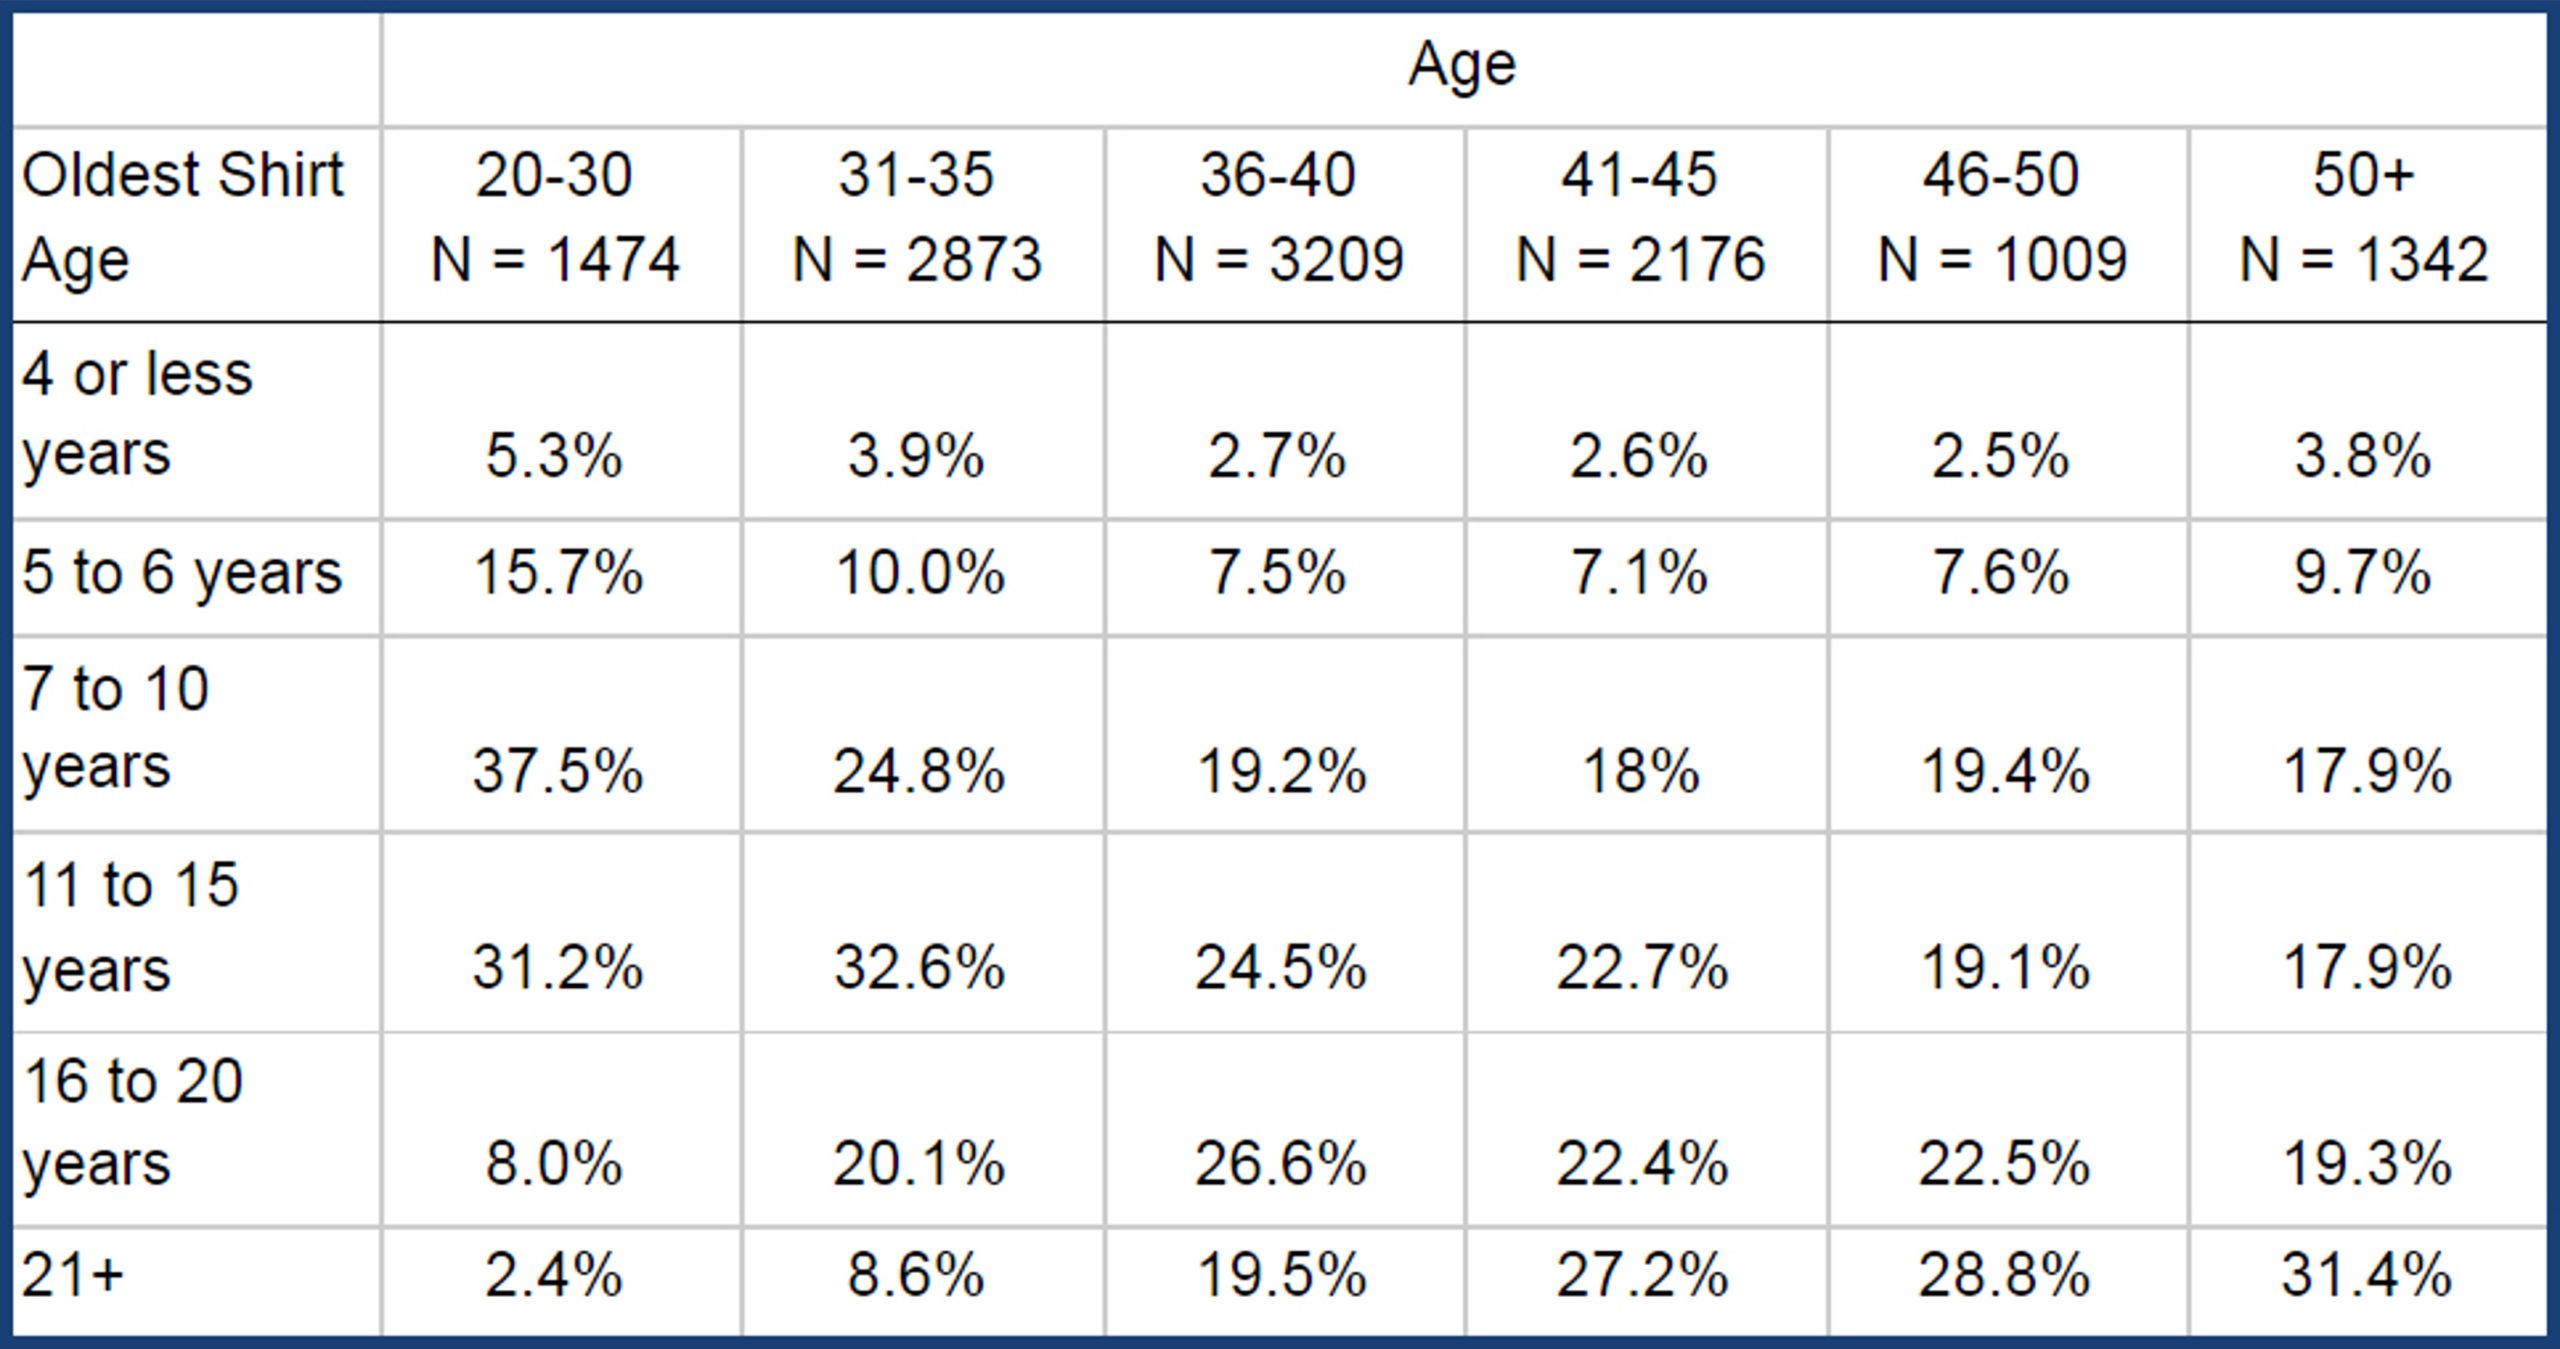 How old is your oldest shirt. Results are broken down by age group